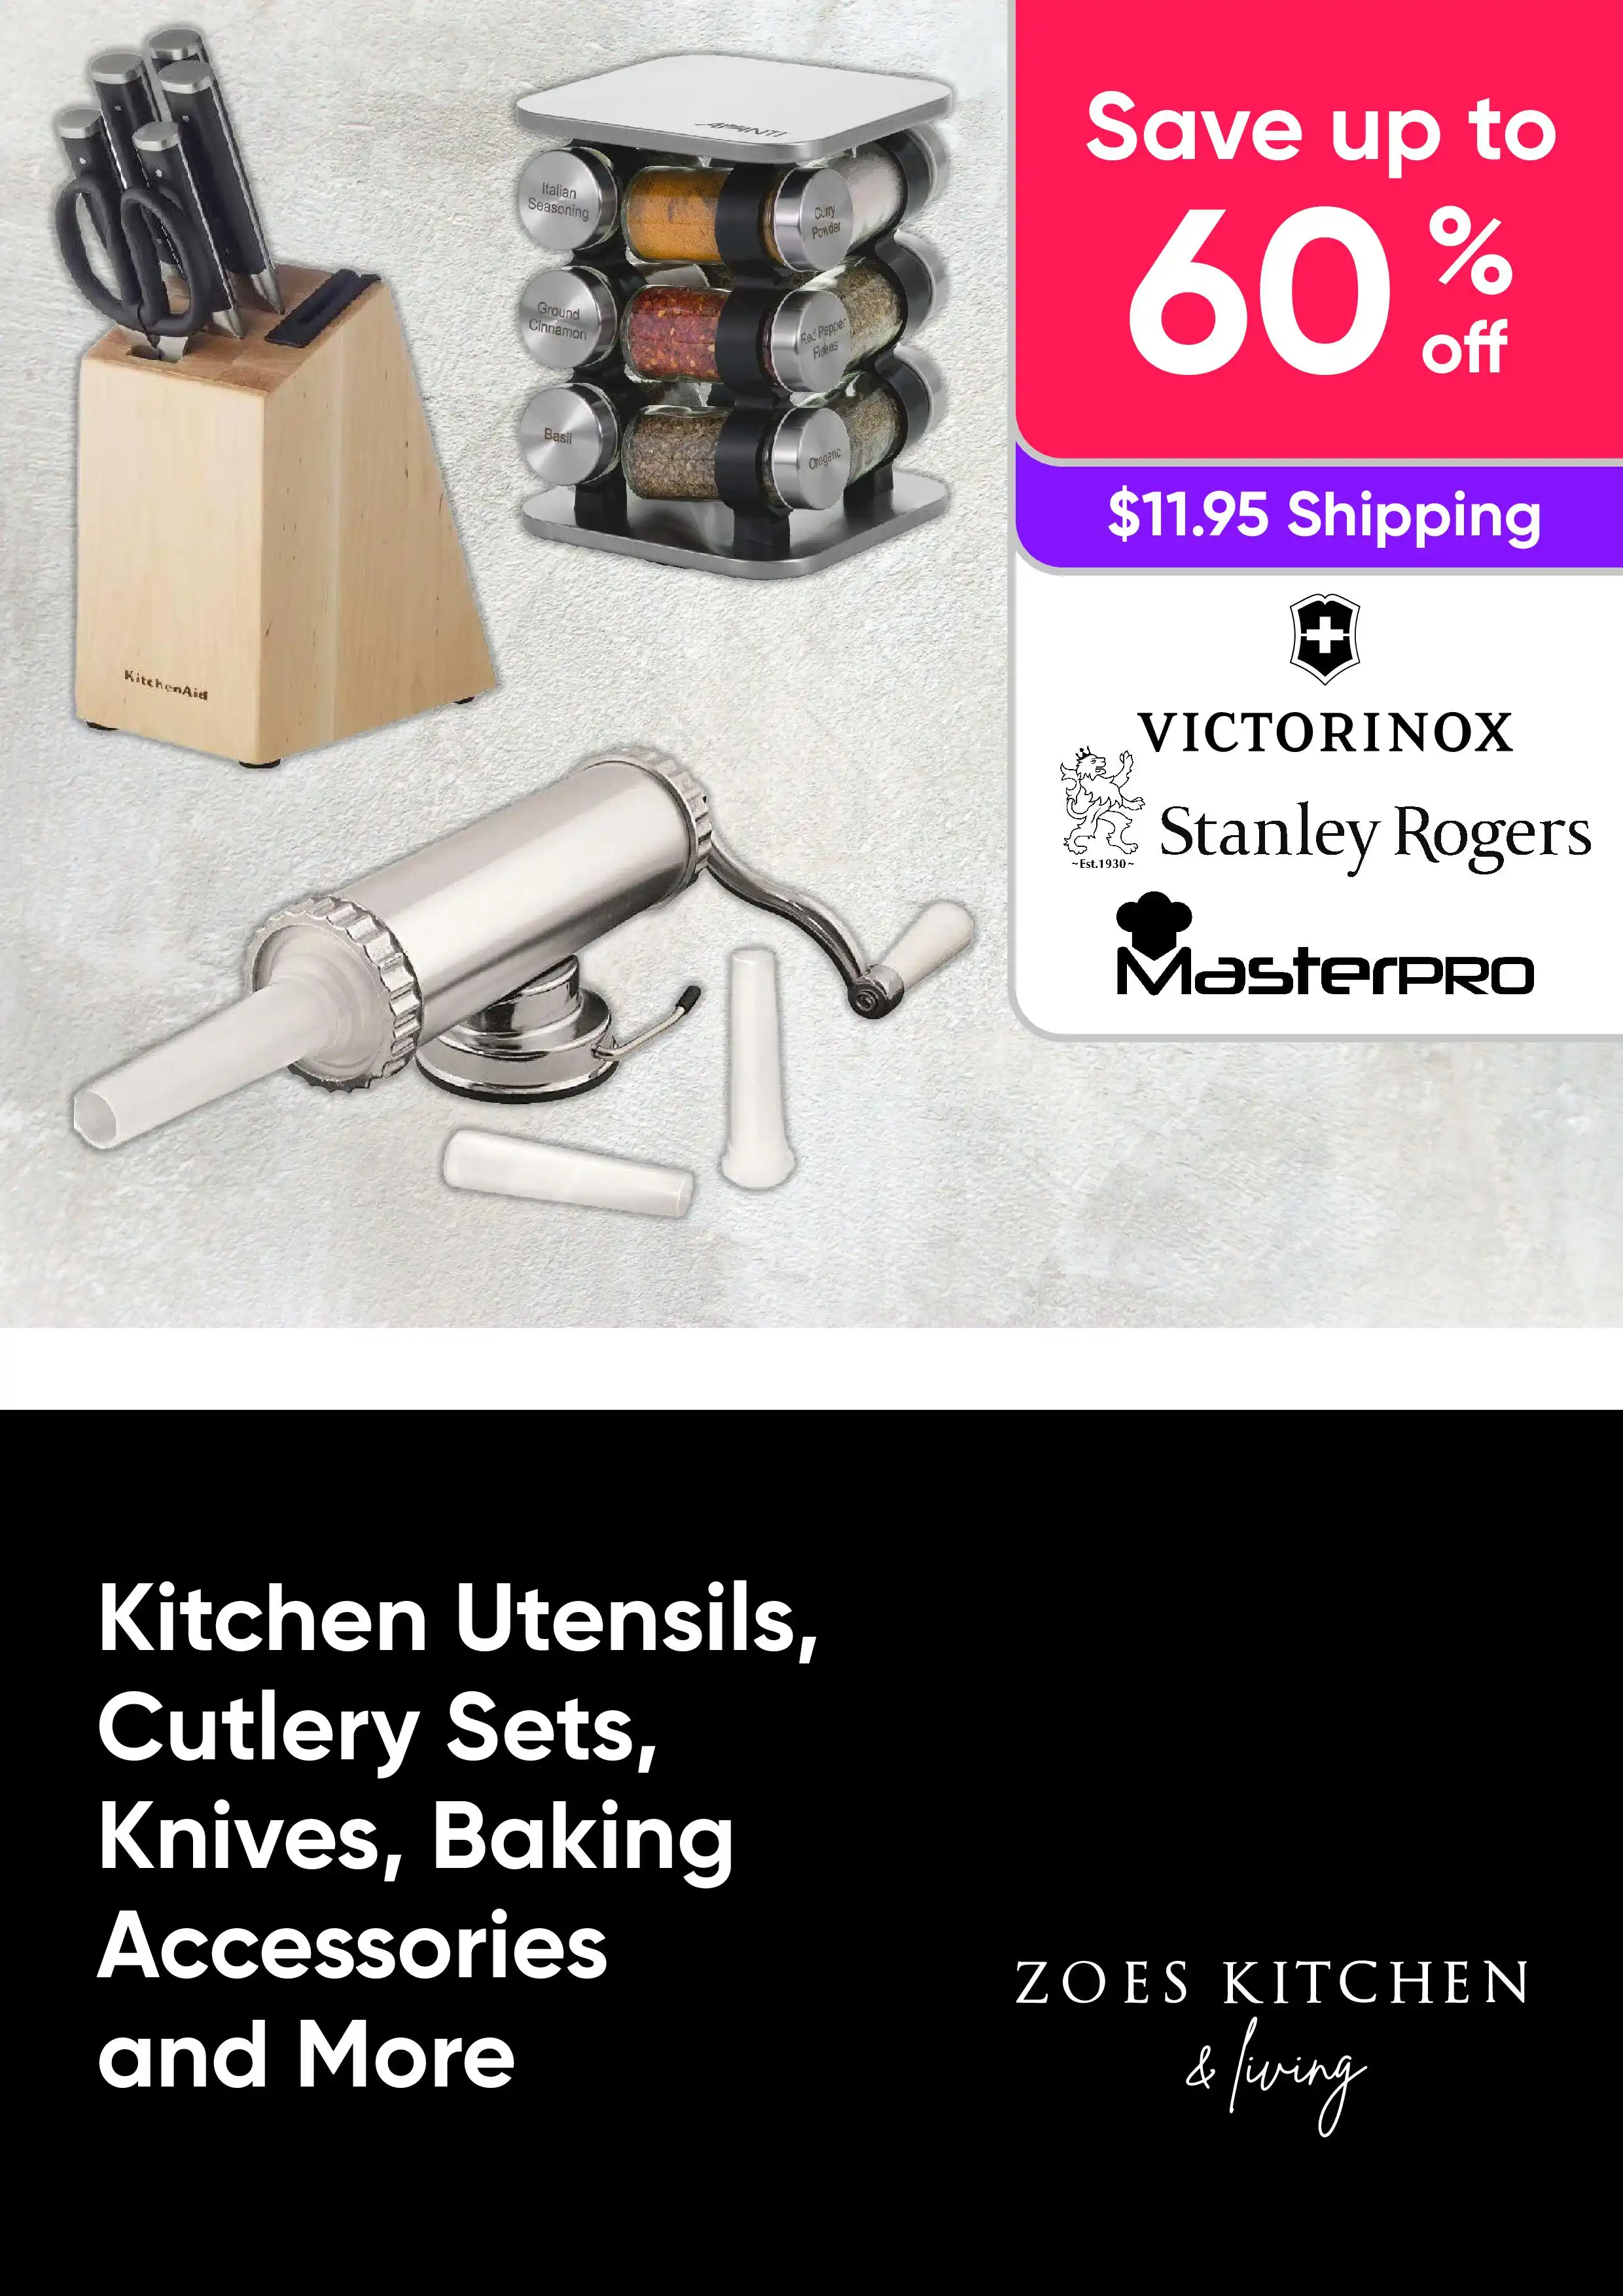 Save Up To 60% Off on a Range of Kitchen Utensils, Cutlery Sets, Knives